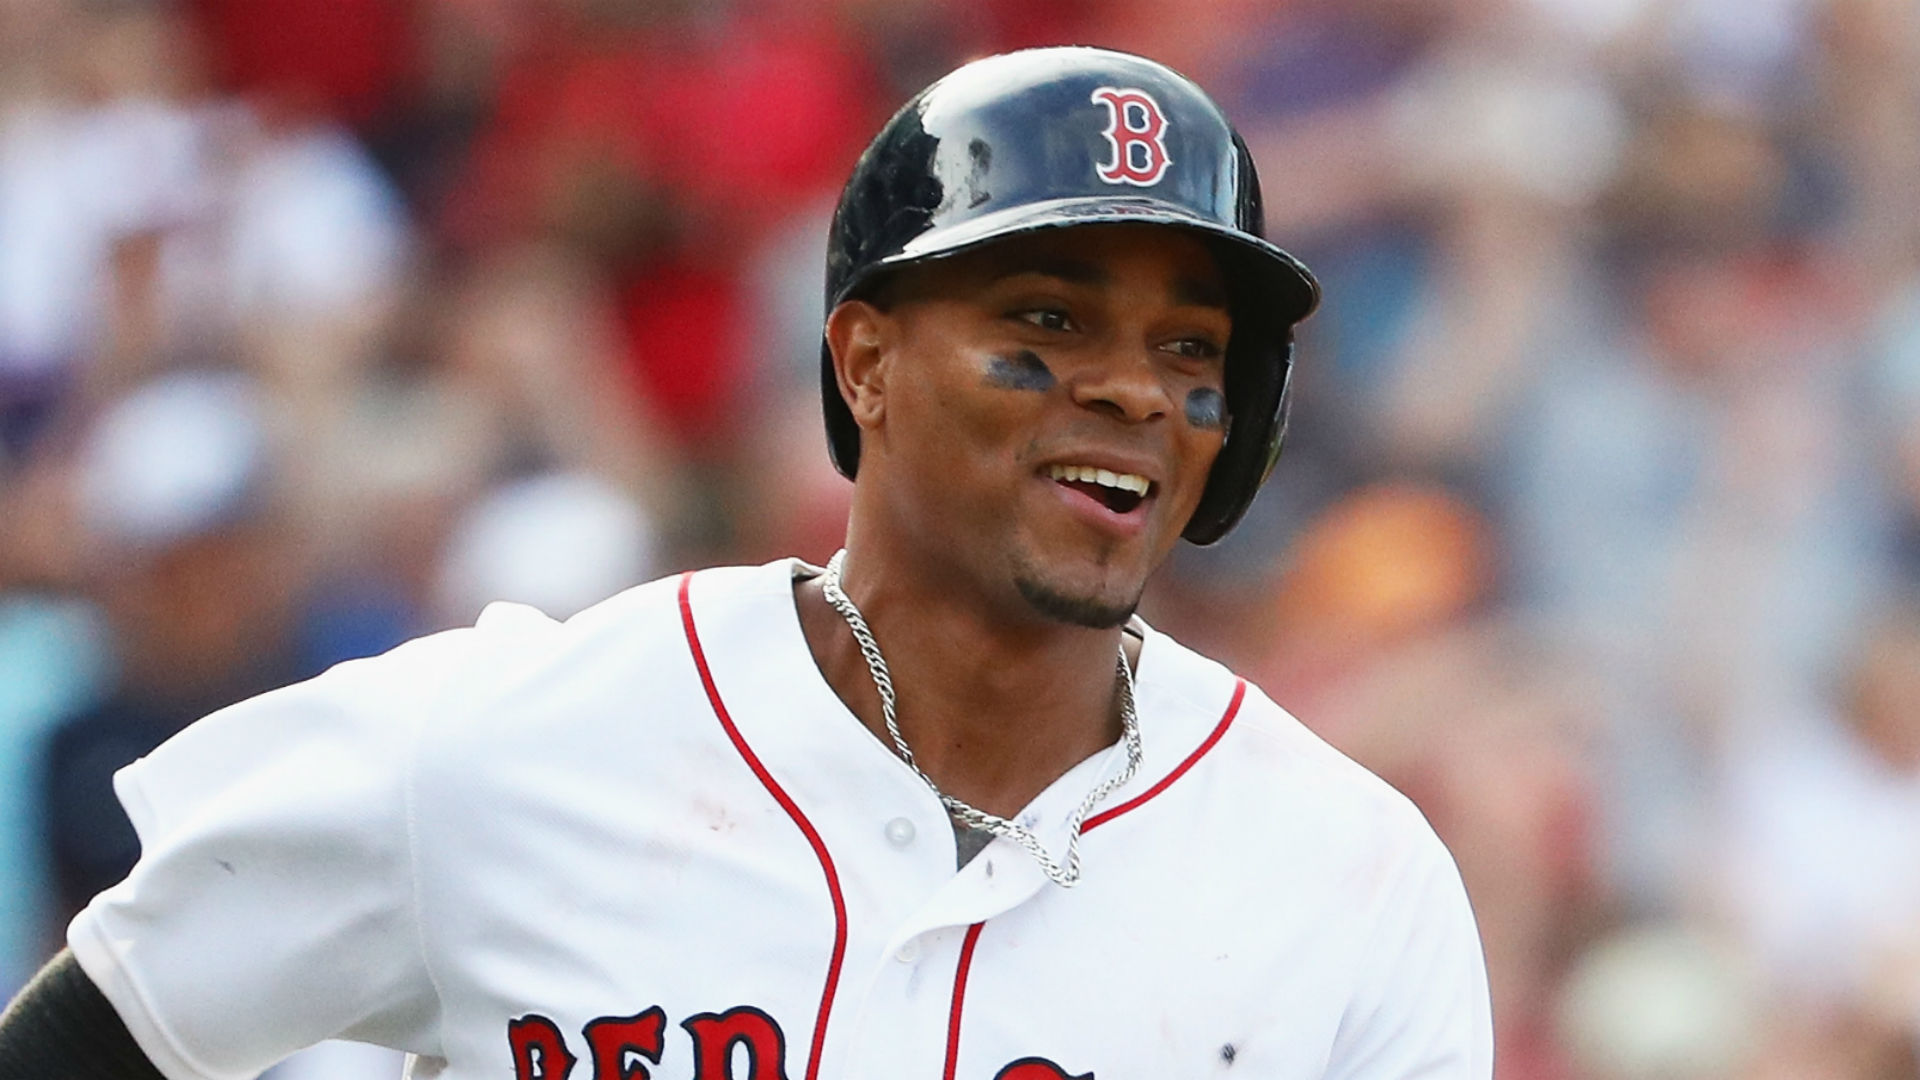 Red Sox place Xander Bogaerts on 10-day DL with ankle injury | MLB | Sporting News